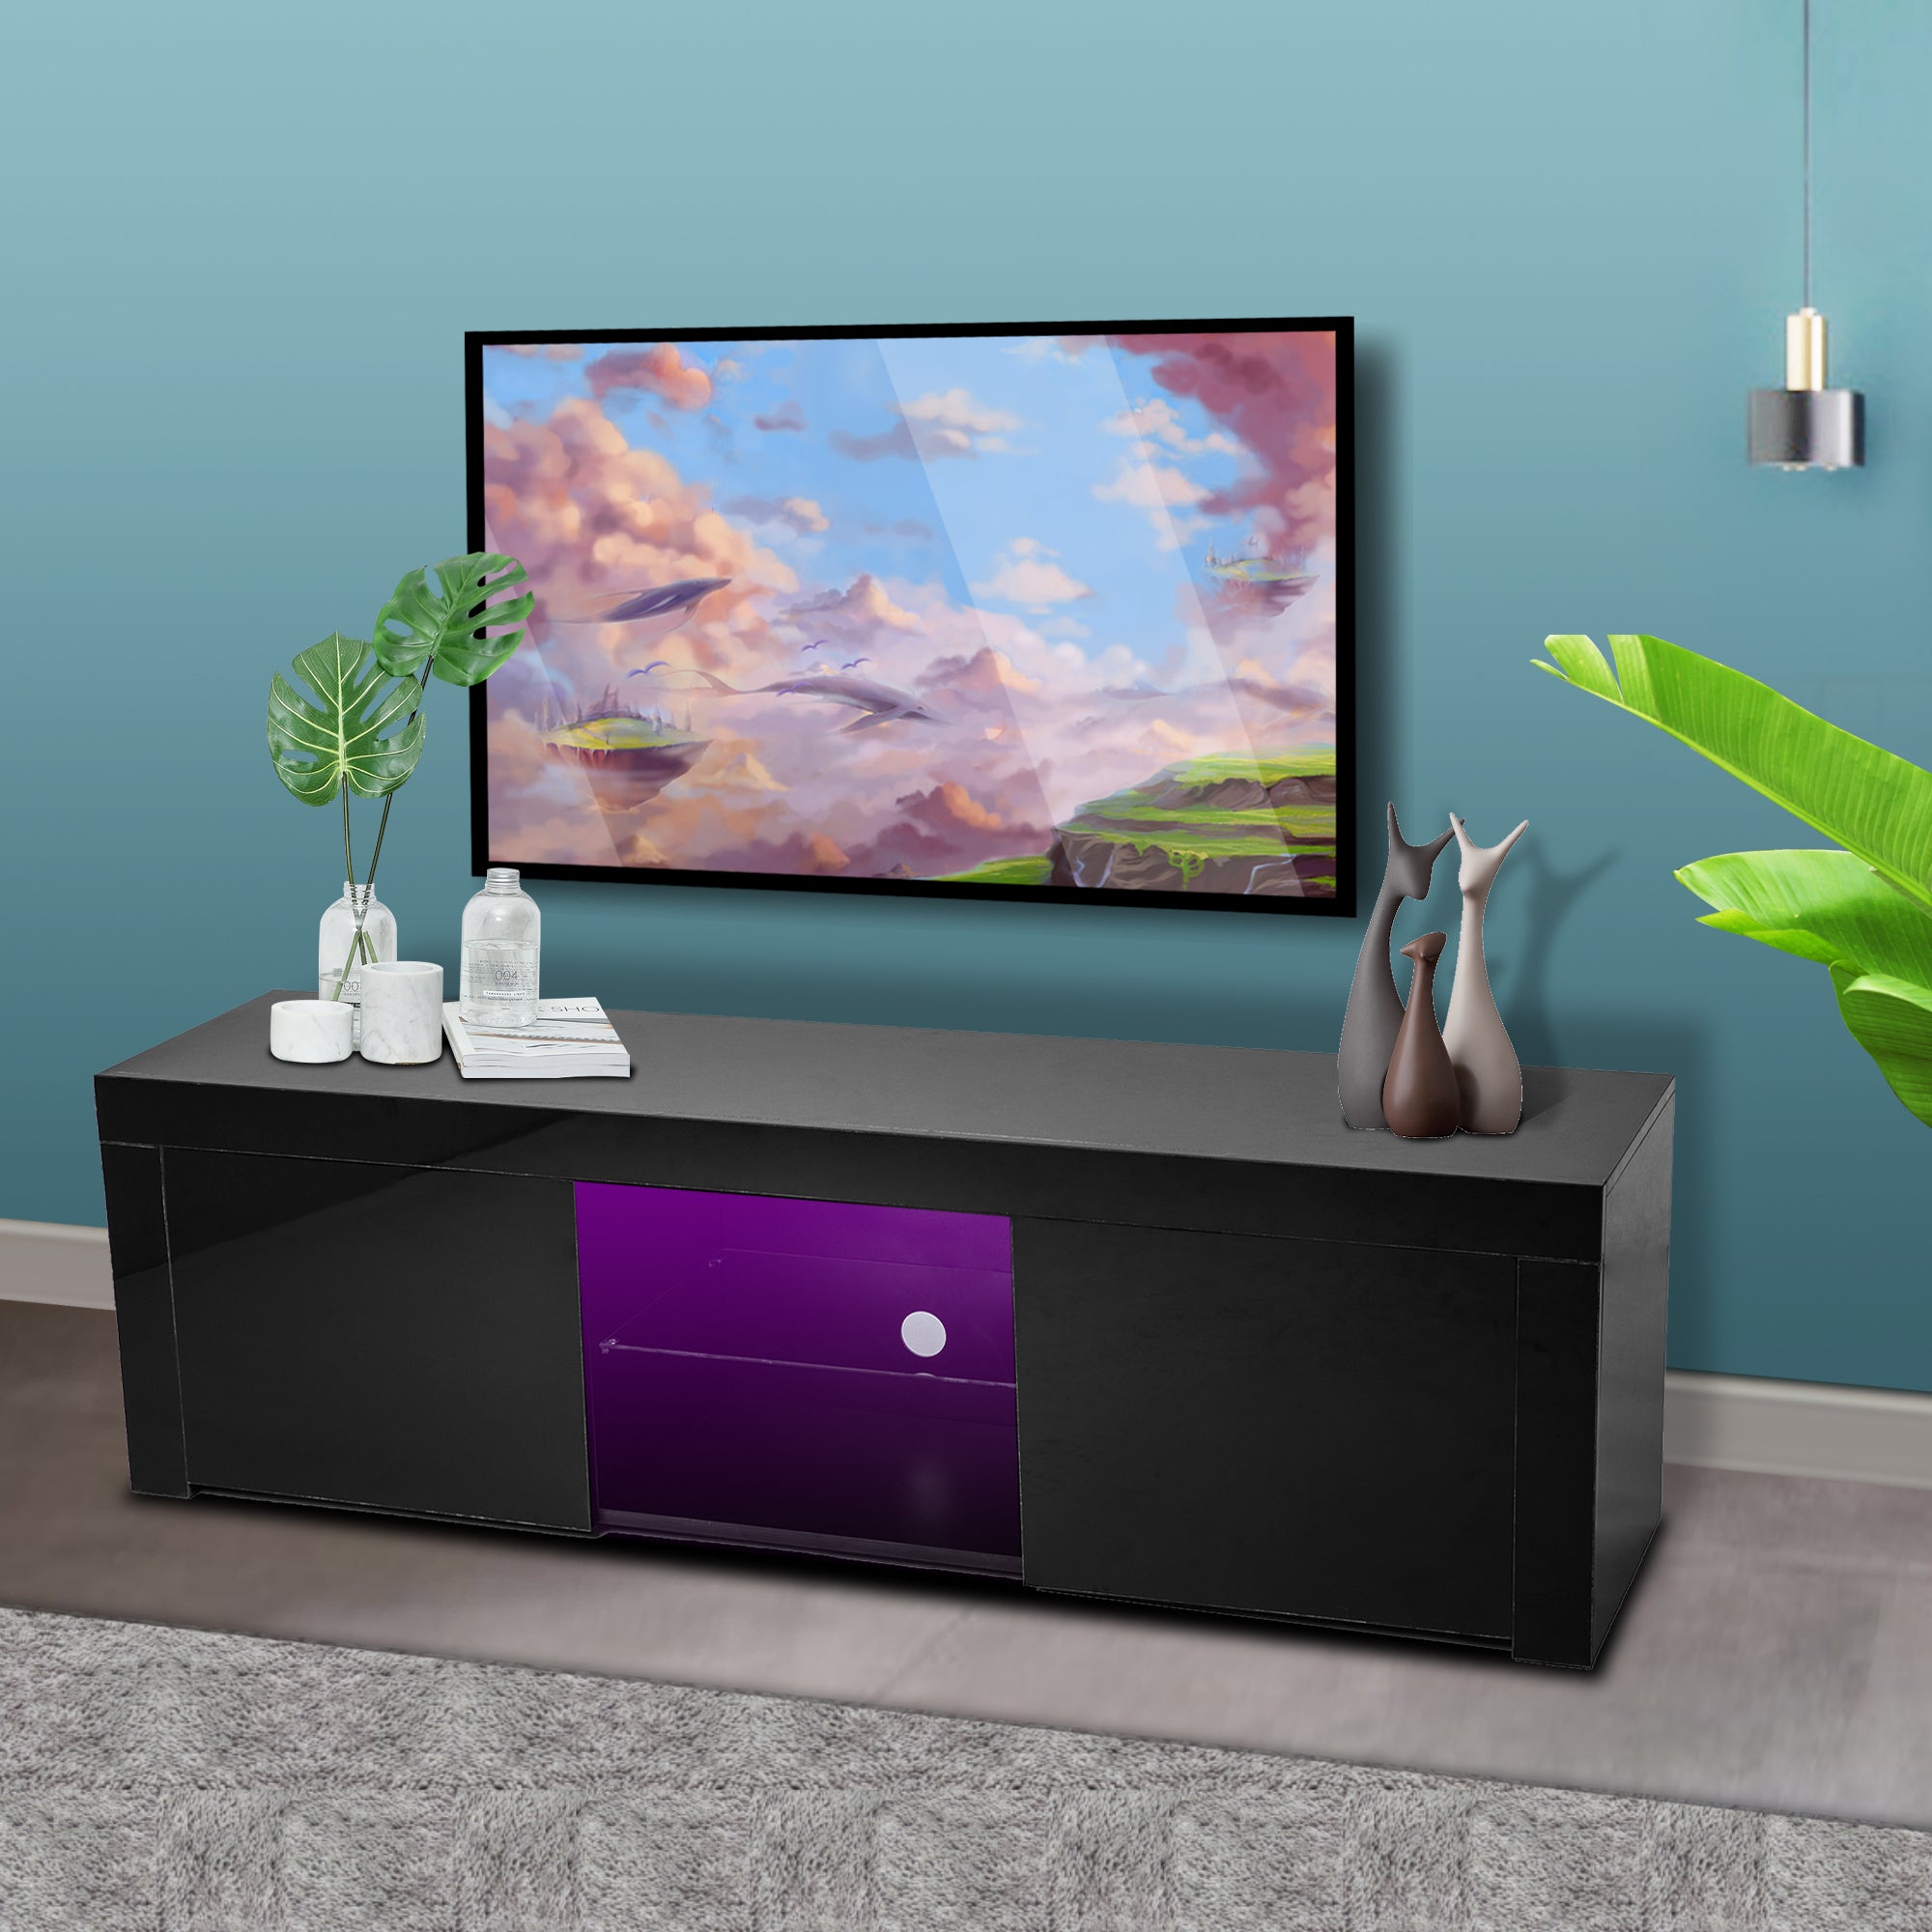 Black morden TV Stand with LED Lights,high glossy front TV Cabinet,can be assembled in Lounge Room, Living Room or Bedroom,color:BLACK